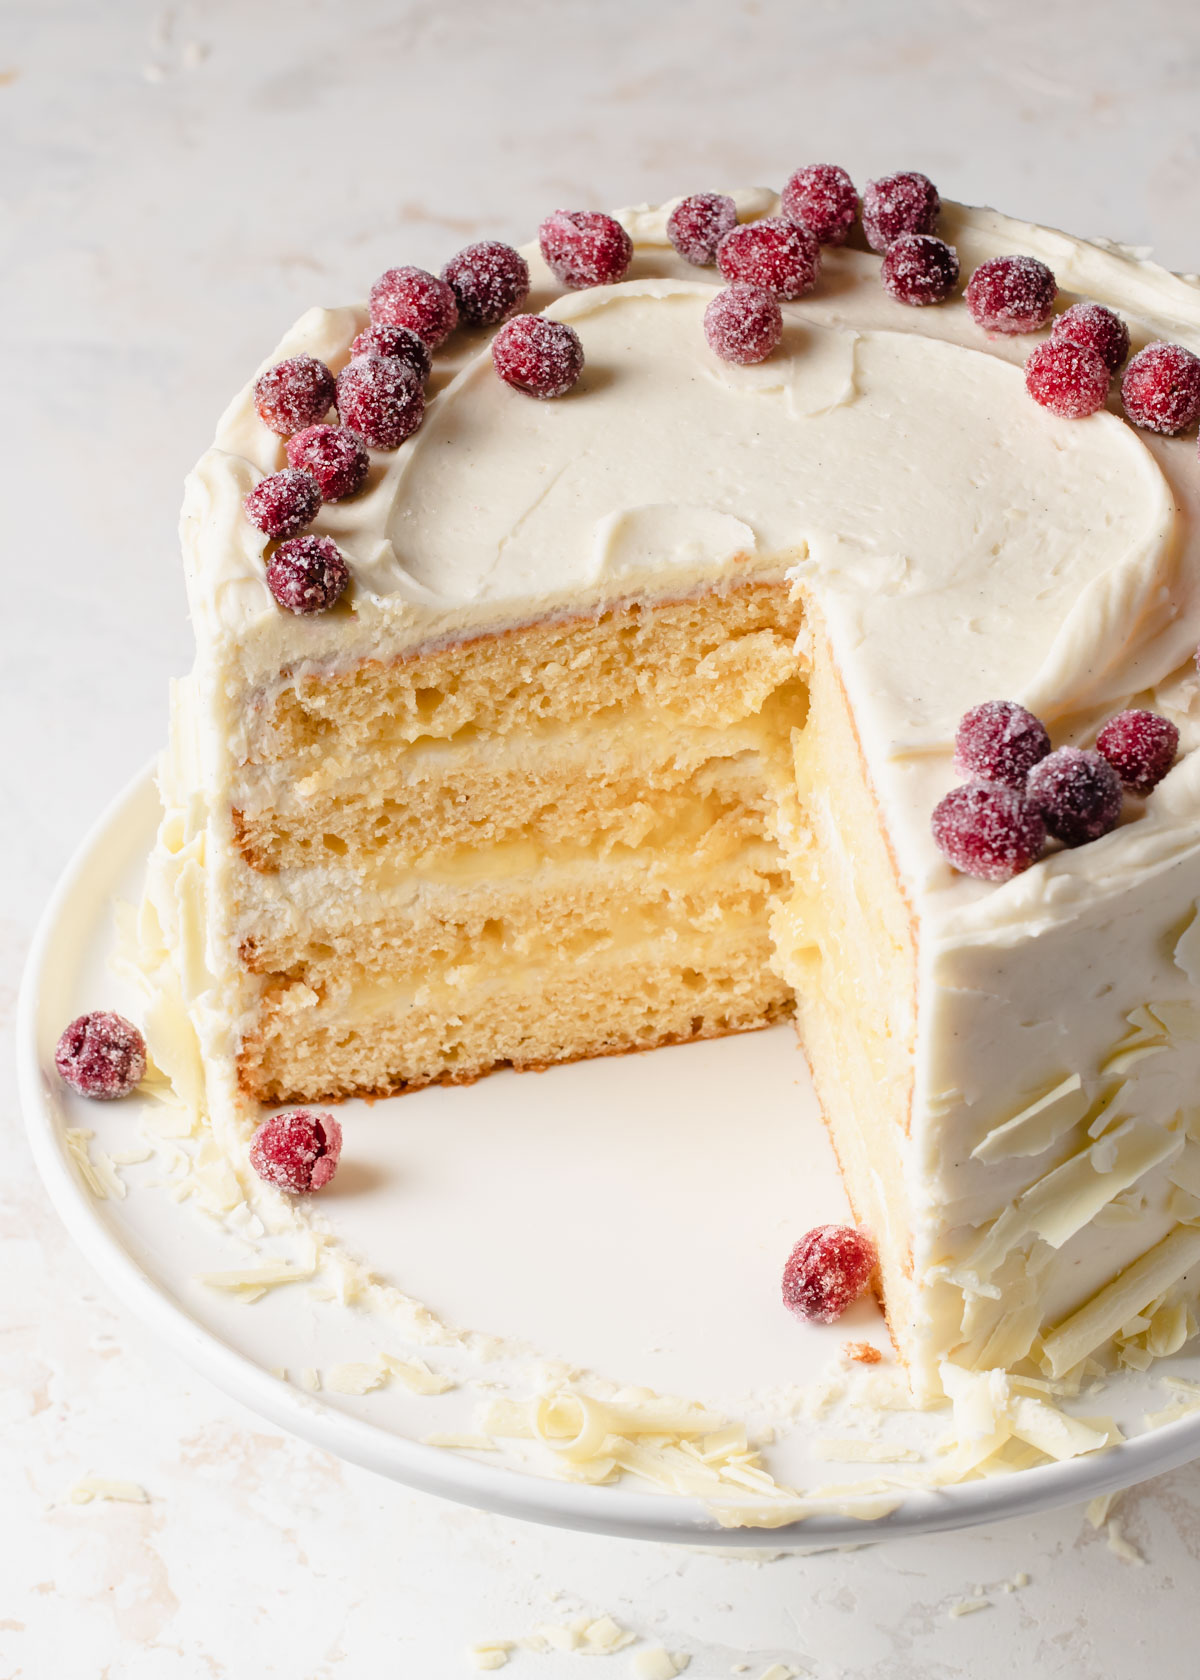 An inside look at a 4-layer lemon cake with lemon curd filling.